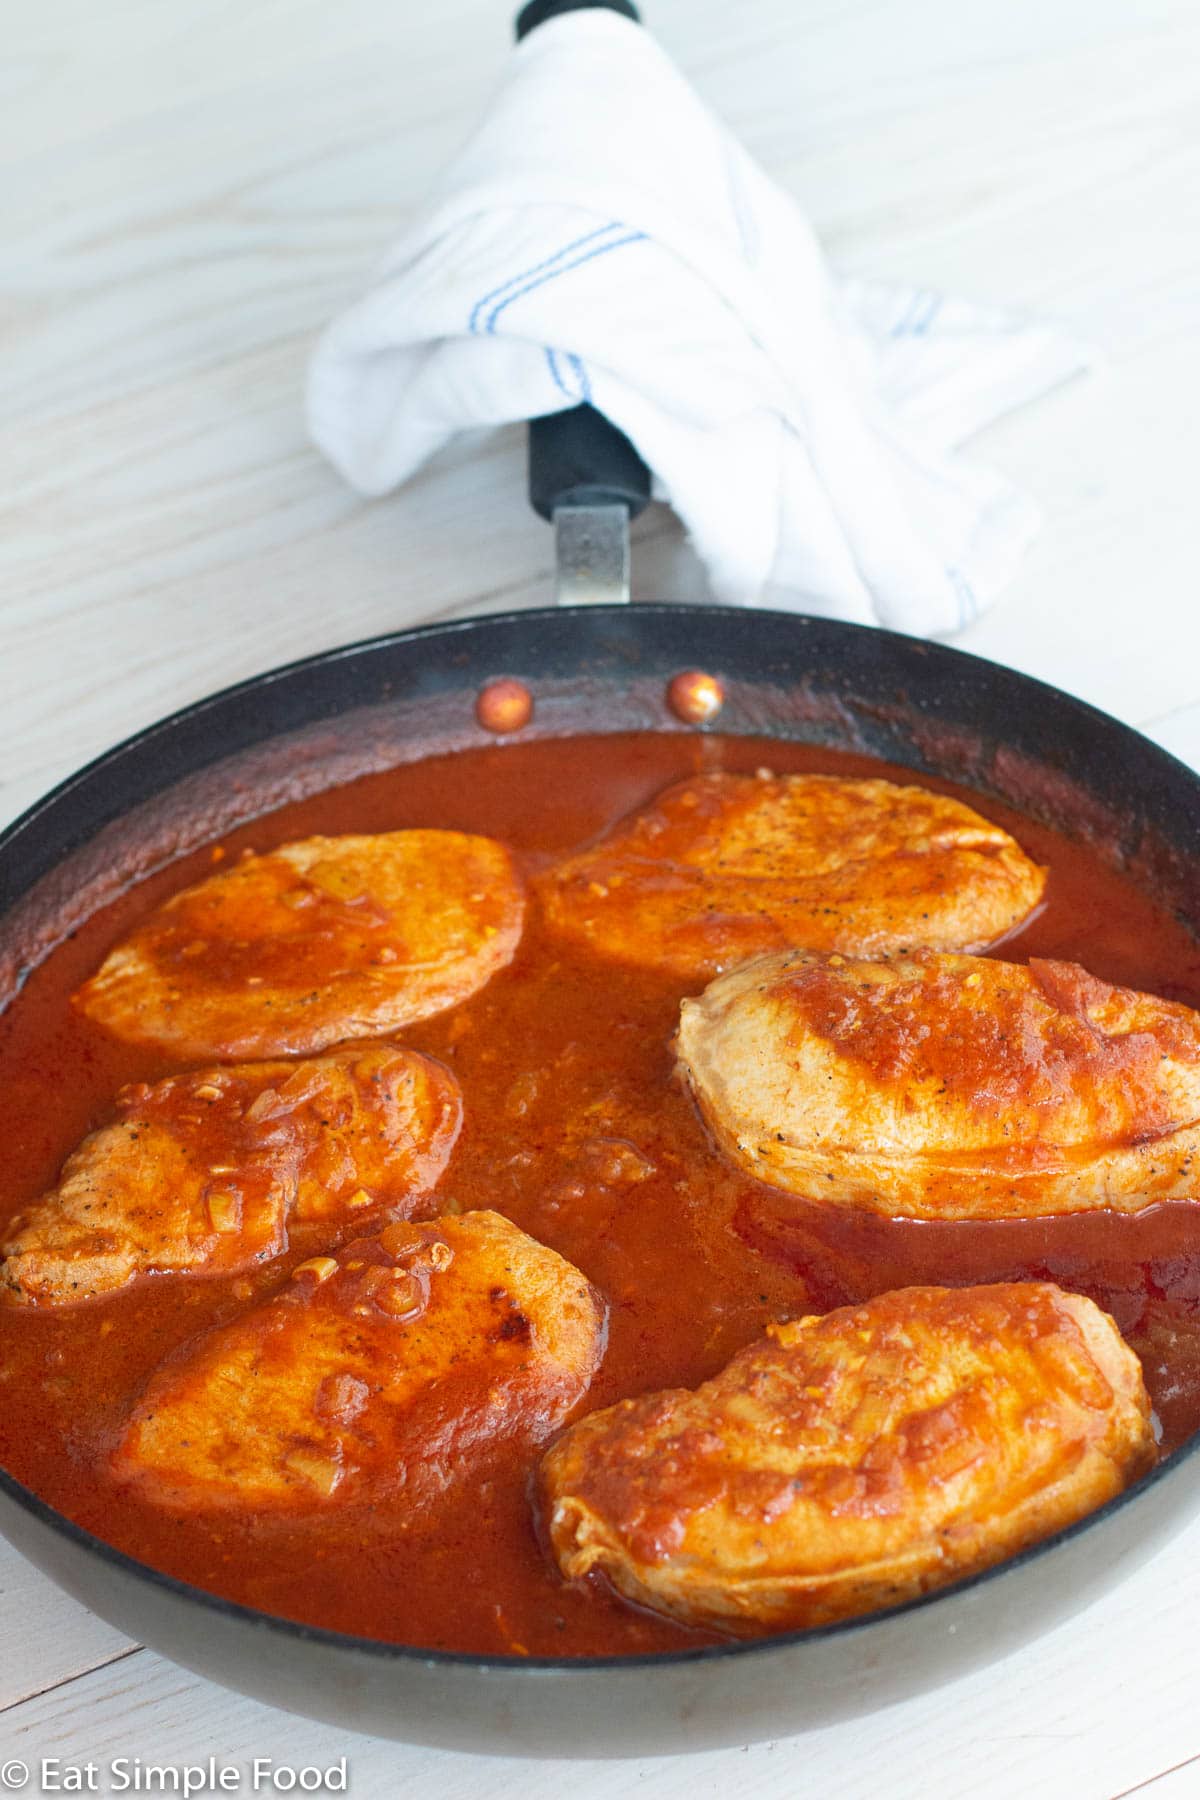 Pan of 6 boneless pork chops with red tomato gravy in a dark skillet on a white table. White napkin wrapped around the pan handle.